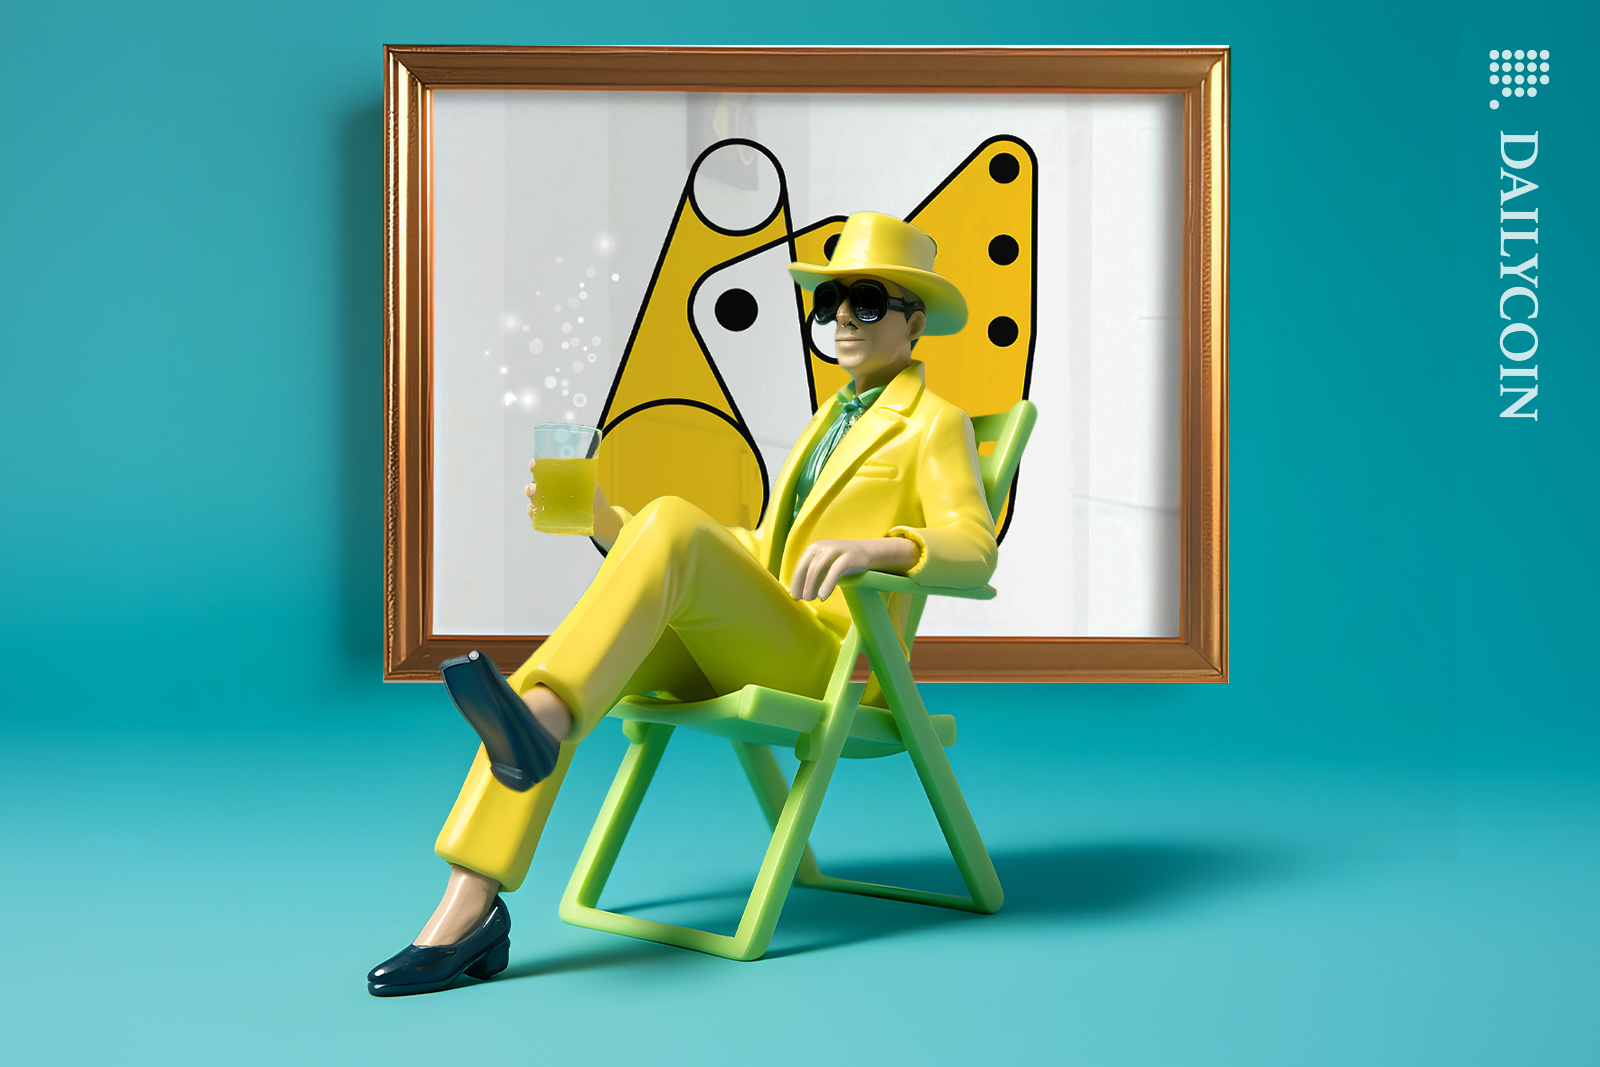 Mr. Yellow buyer, enjoying his NFT art and celebrating with a glass of finest yellow bubbly.